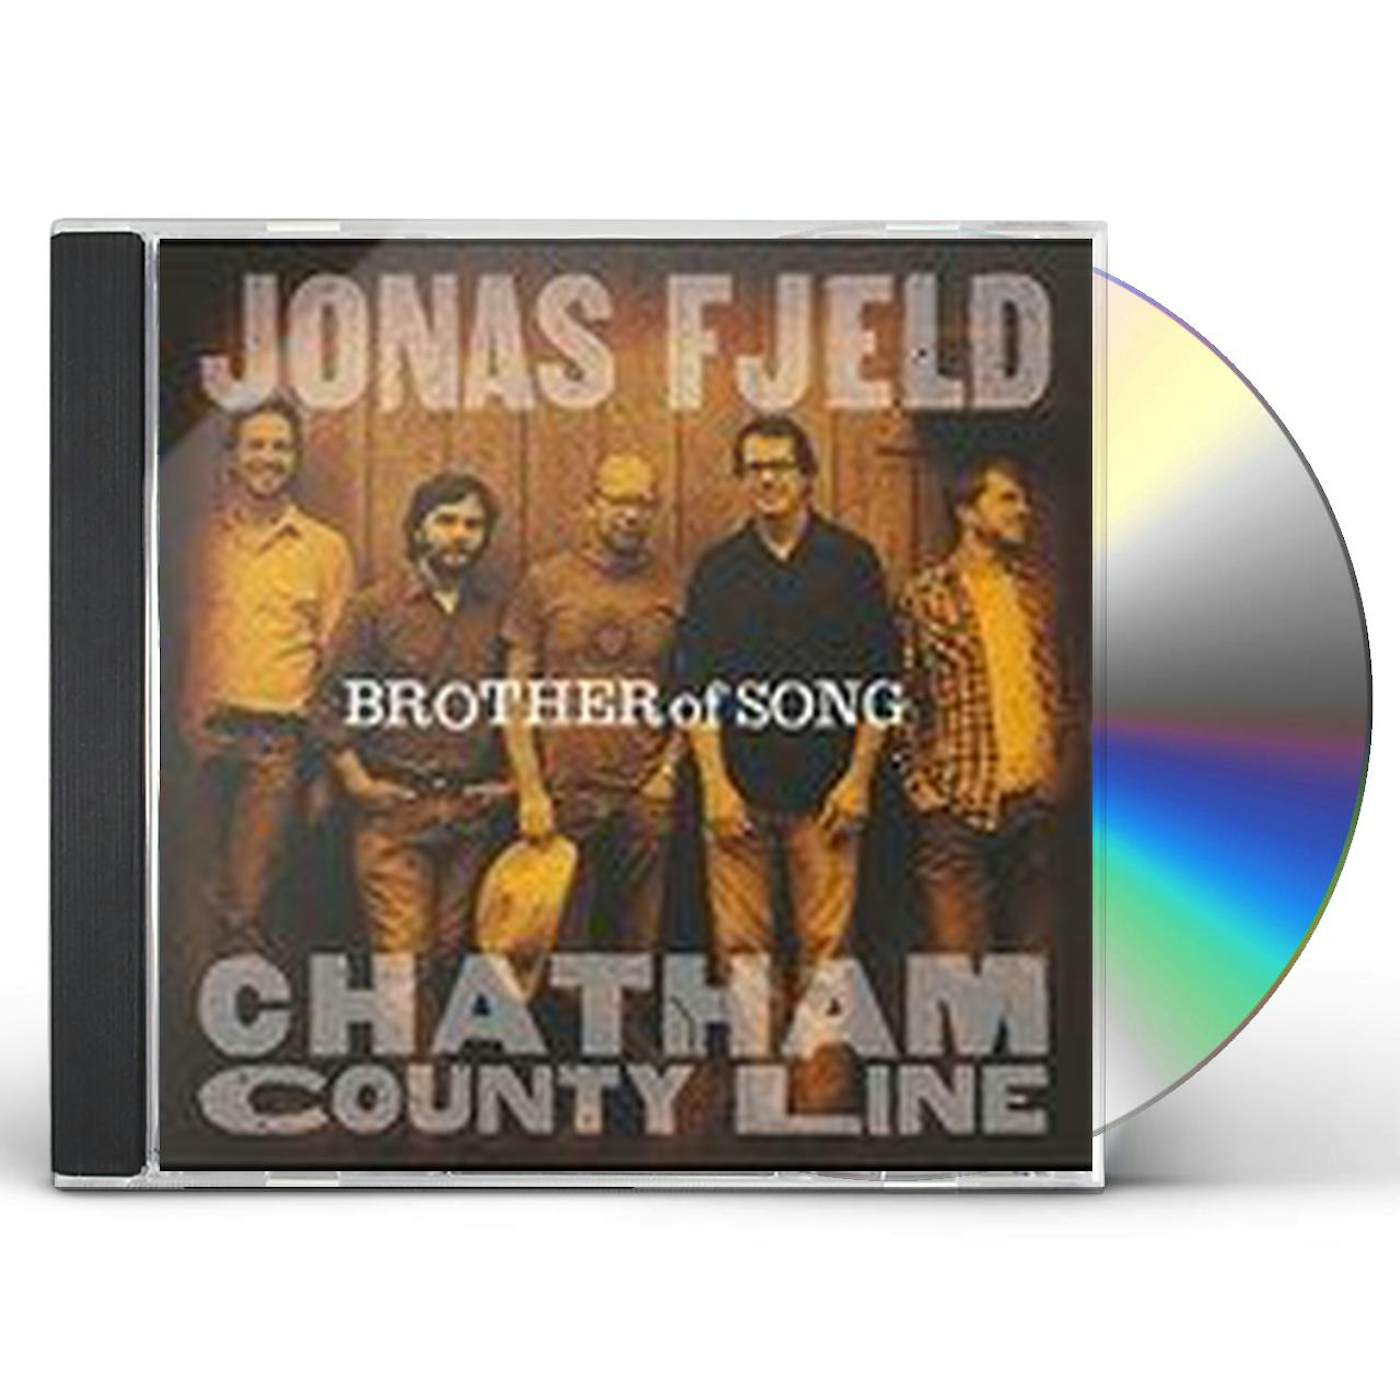 Jonas Fjeld & Chatham County Line BROTHER OF SONG CD